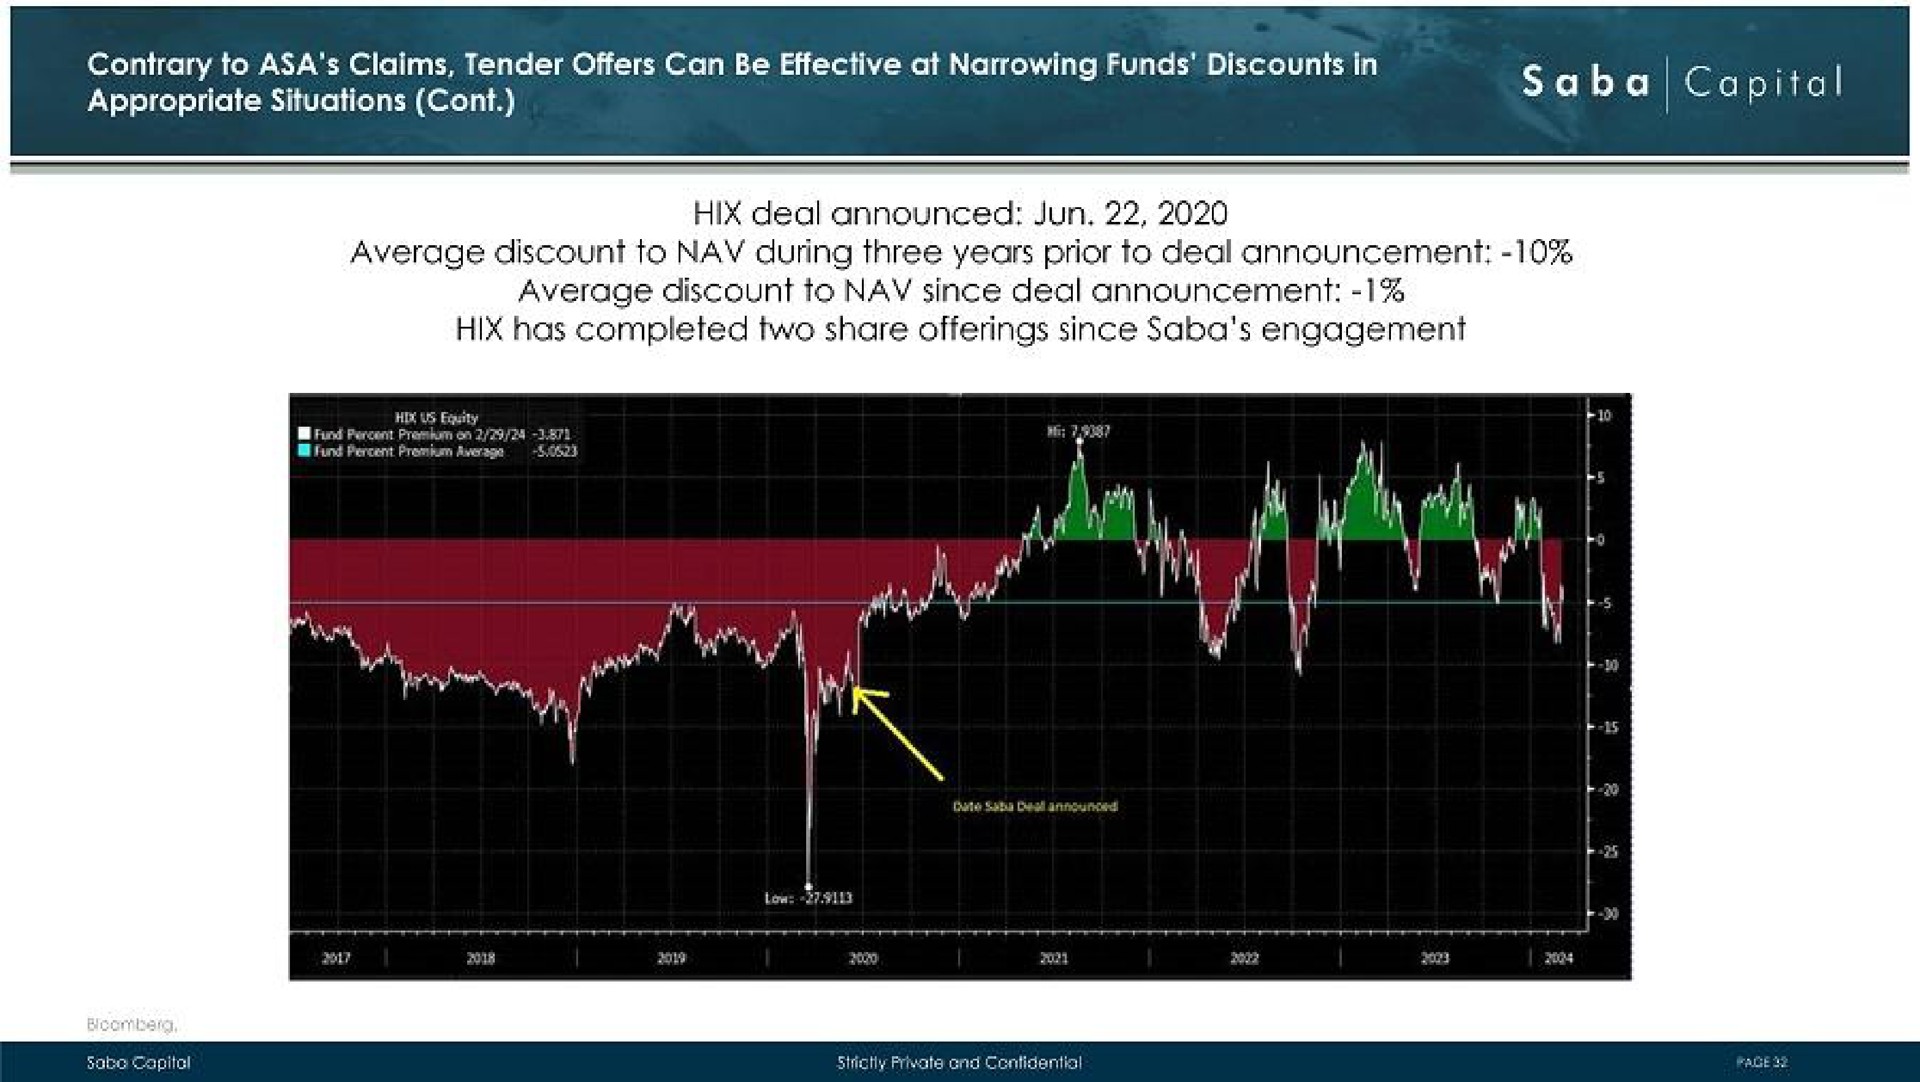 contrary to claims tender offers can be effective at narrowing funds discounts in appropriate situations tol no aged deal announced average discount to during three years prior deal announcement average discount to since deal announcement has completed two share offerings since engagement | Saba Capital Management